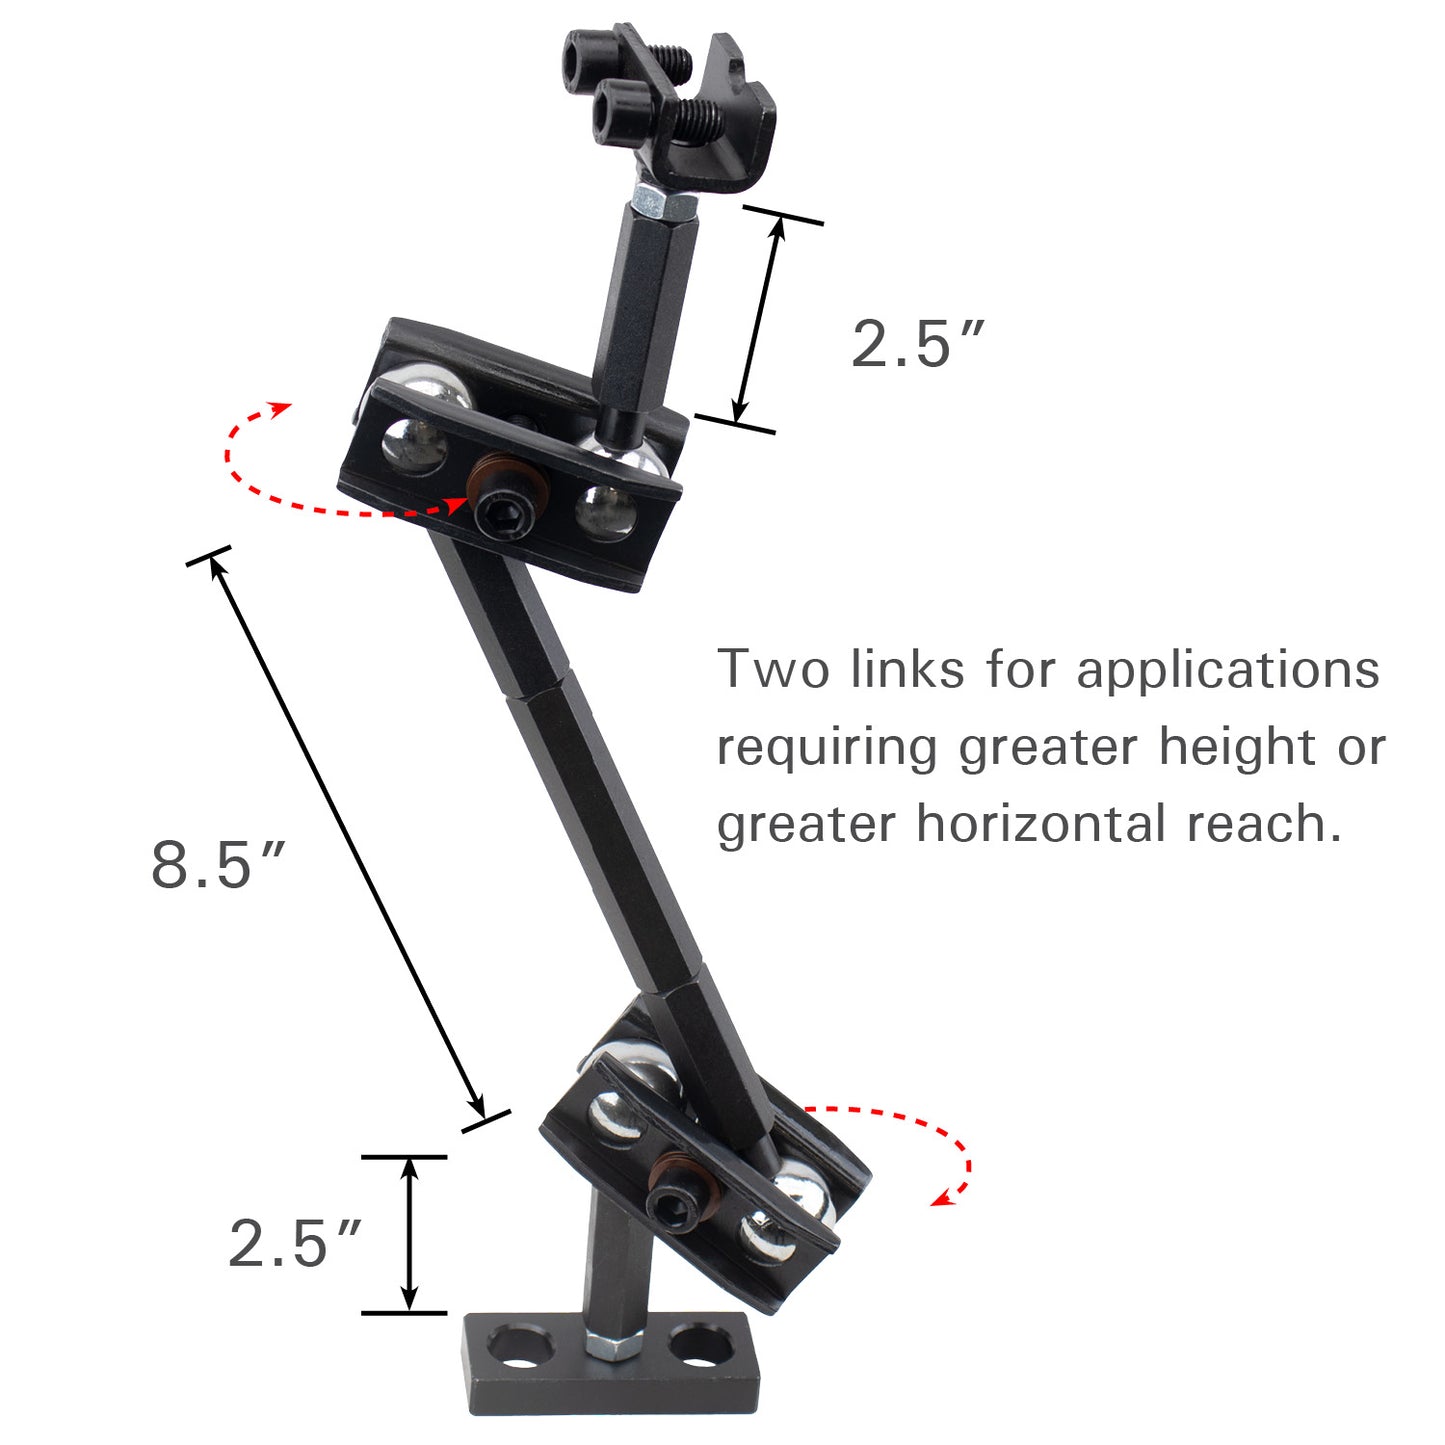 The Third Hand Modular Clamps